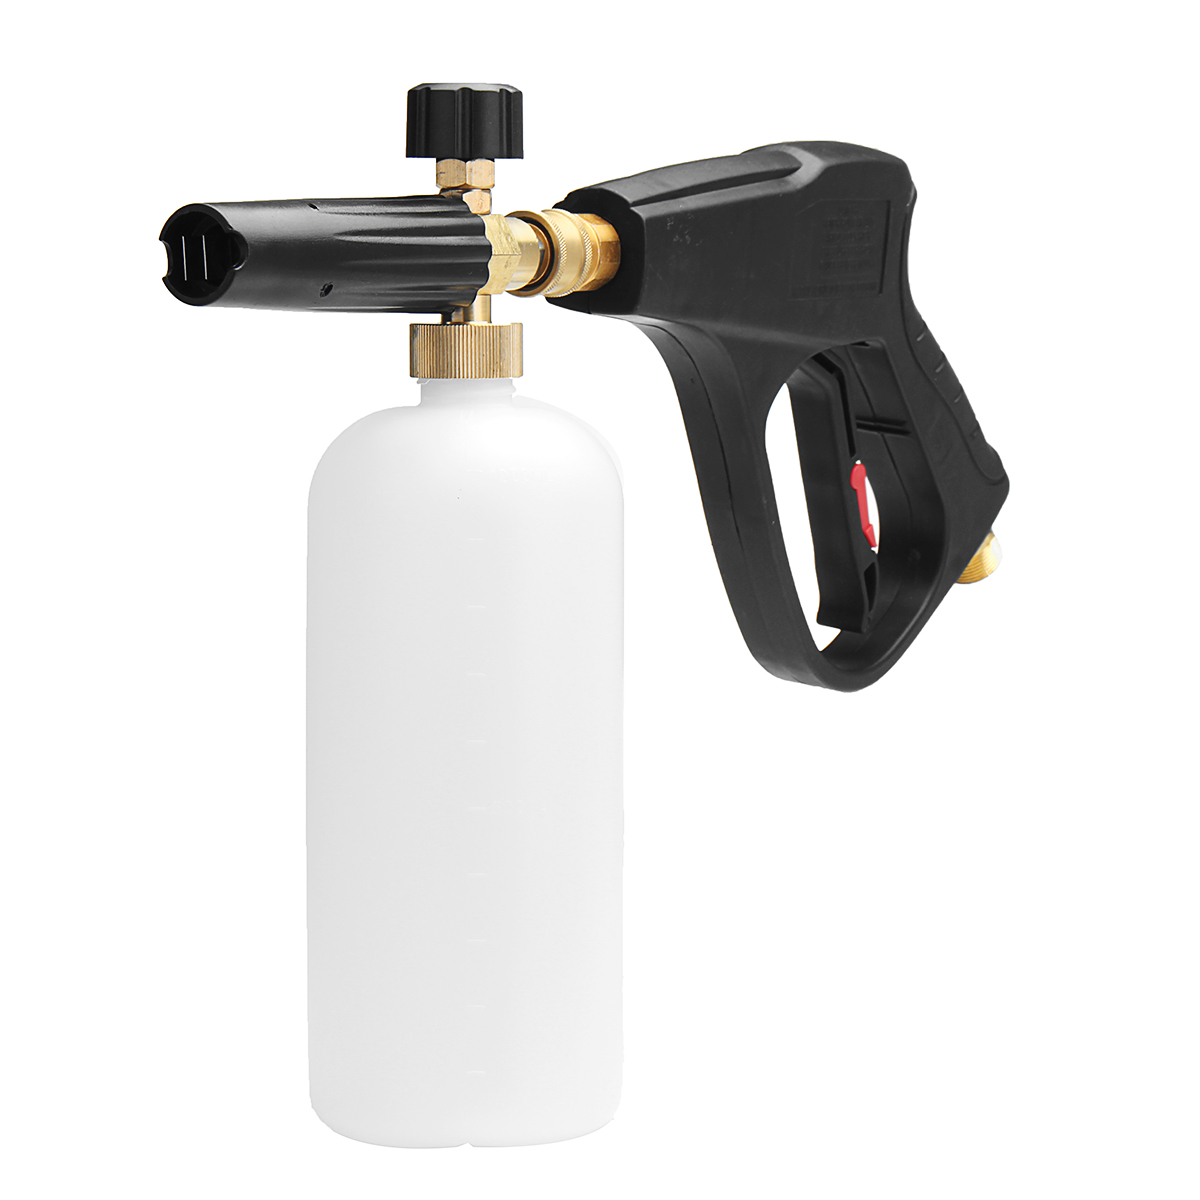 High-Pressure-Washer-Jet-14quot-Snow-Foam-Lance-Cannon-Car-Clean-Washer-Bottle-1374822